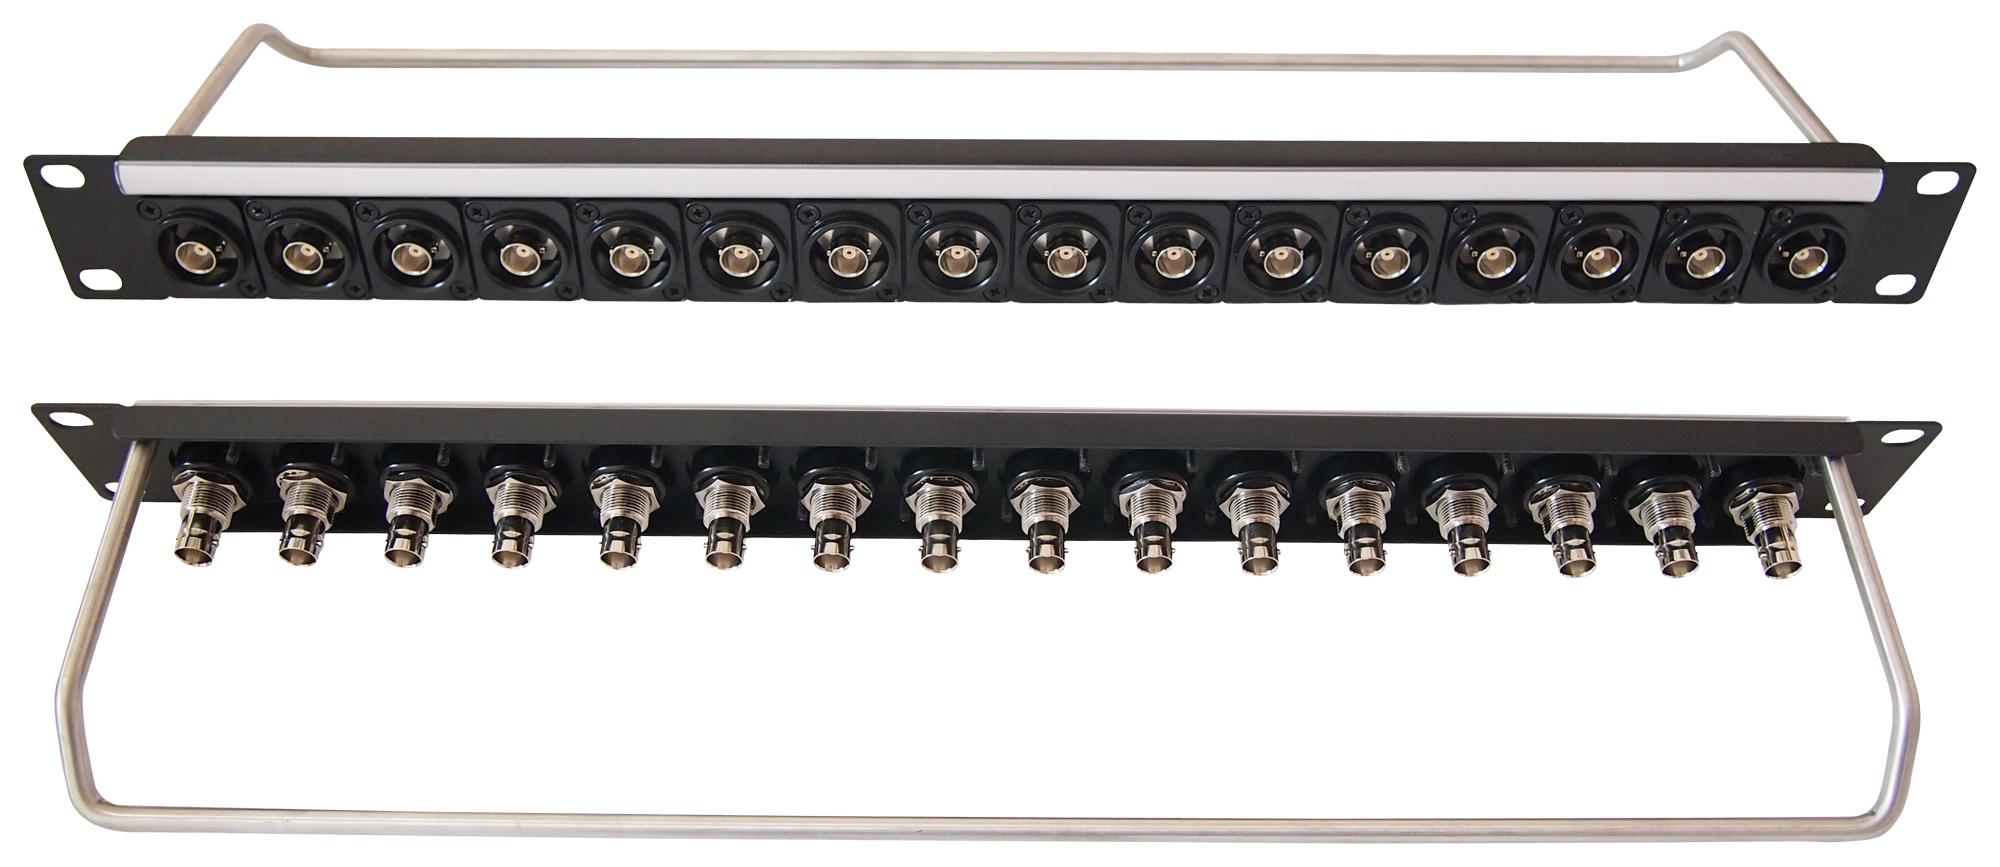 CP30171 BNC PATCH PANEL, 16POS, 1U, 4-40 HOLE CLIFF ELECTRONIC COMPONENTS